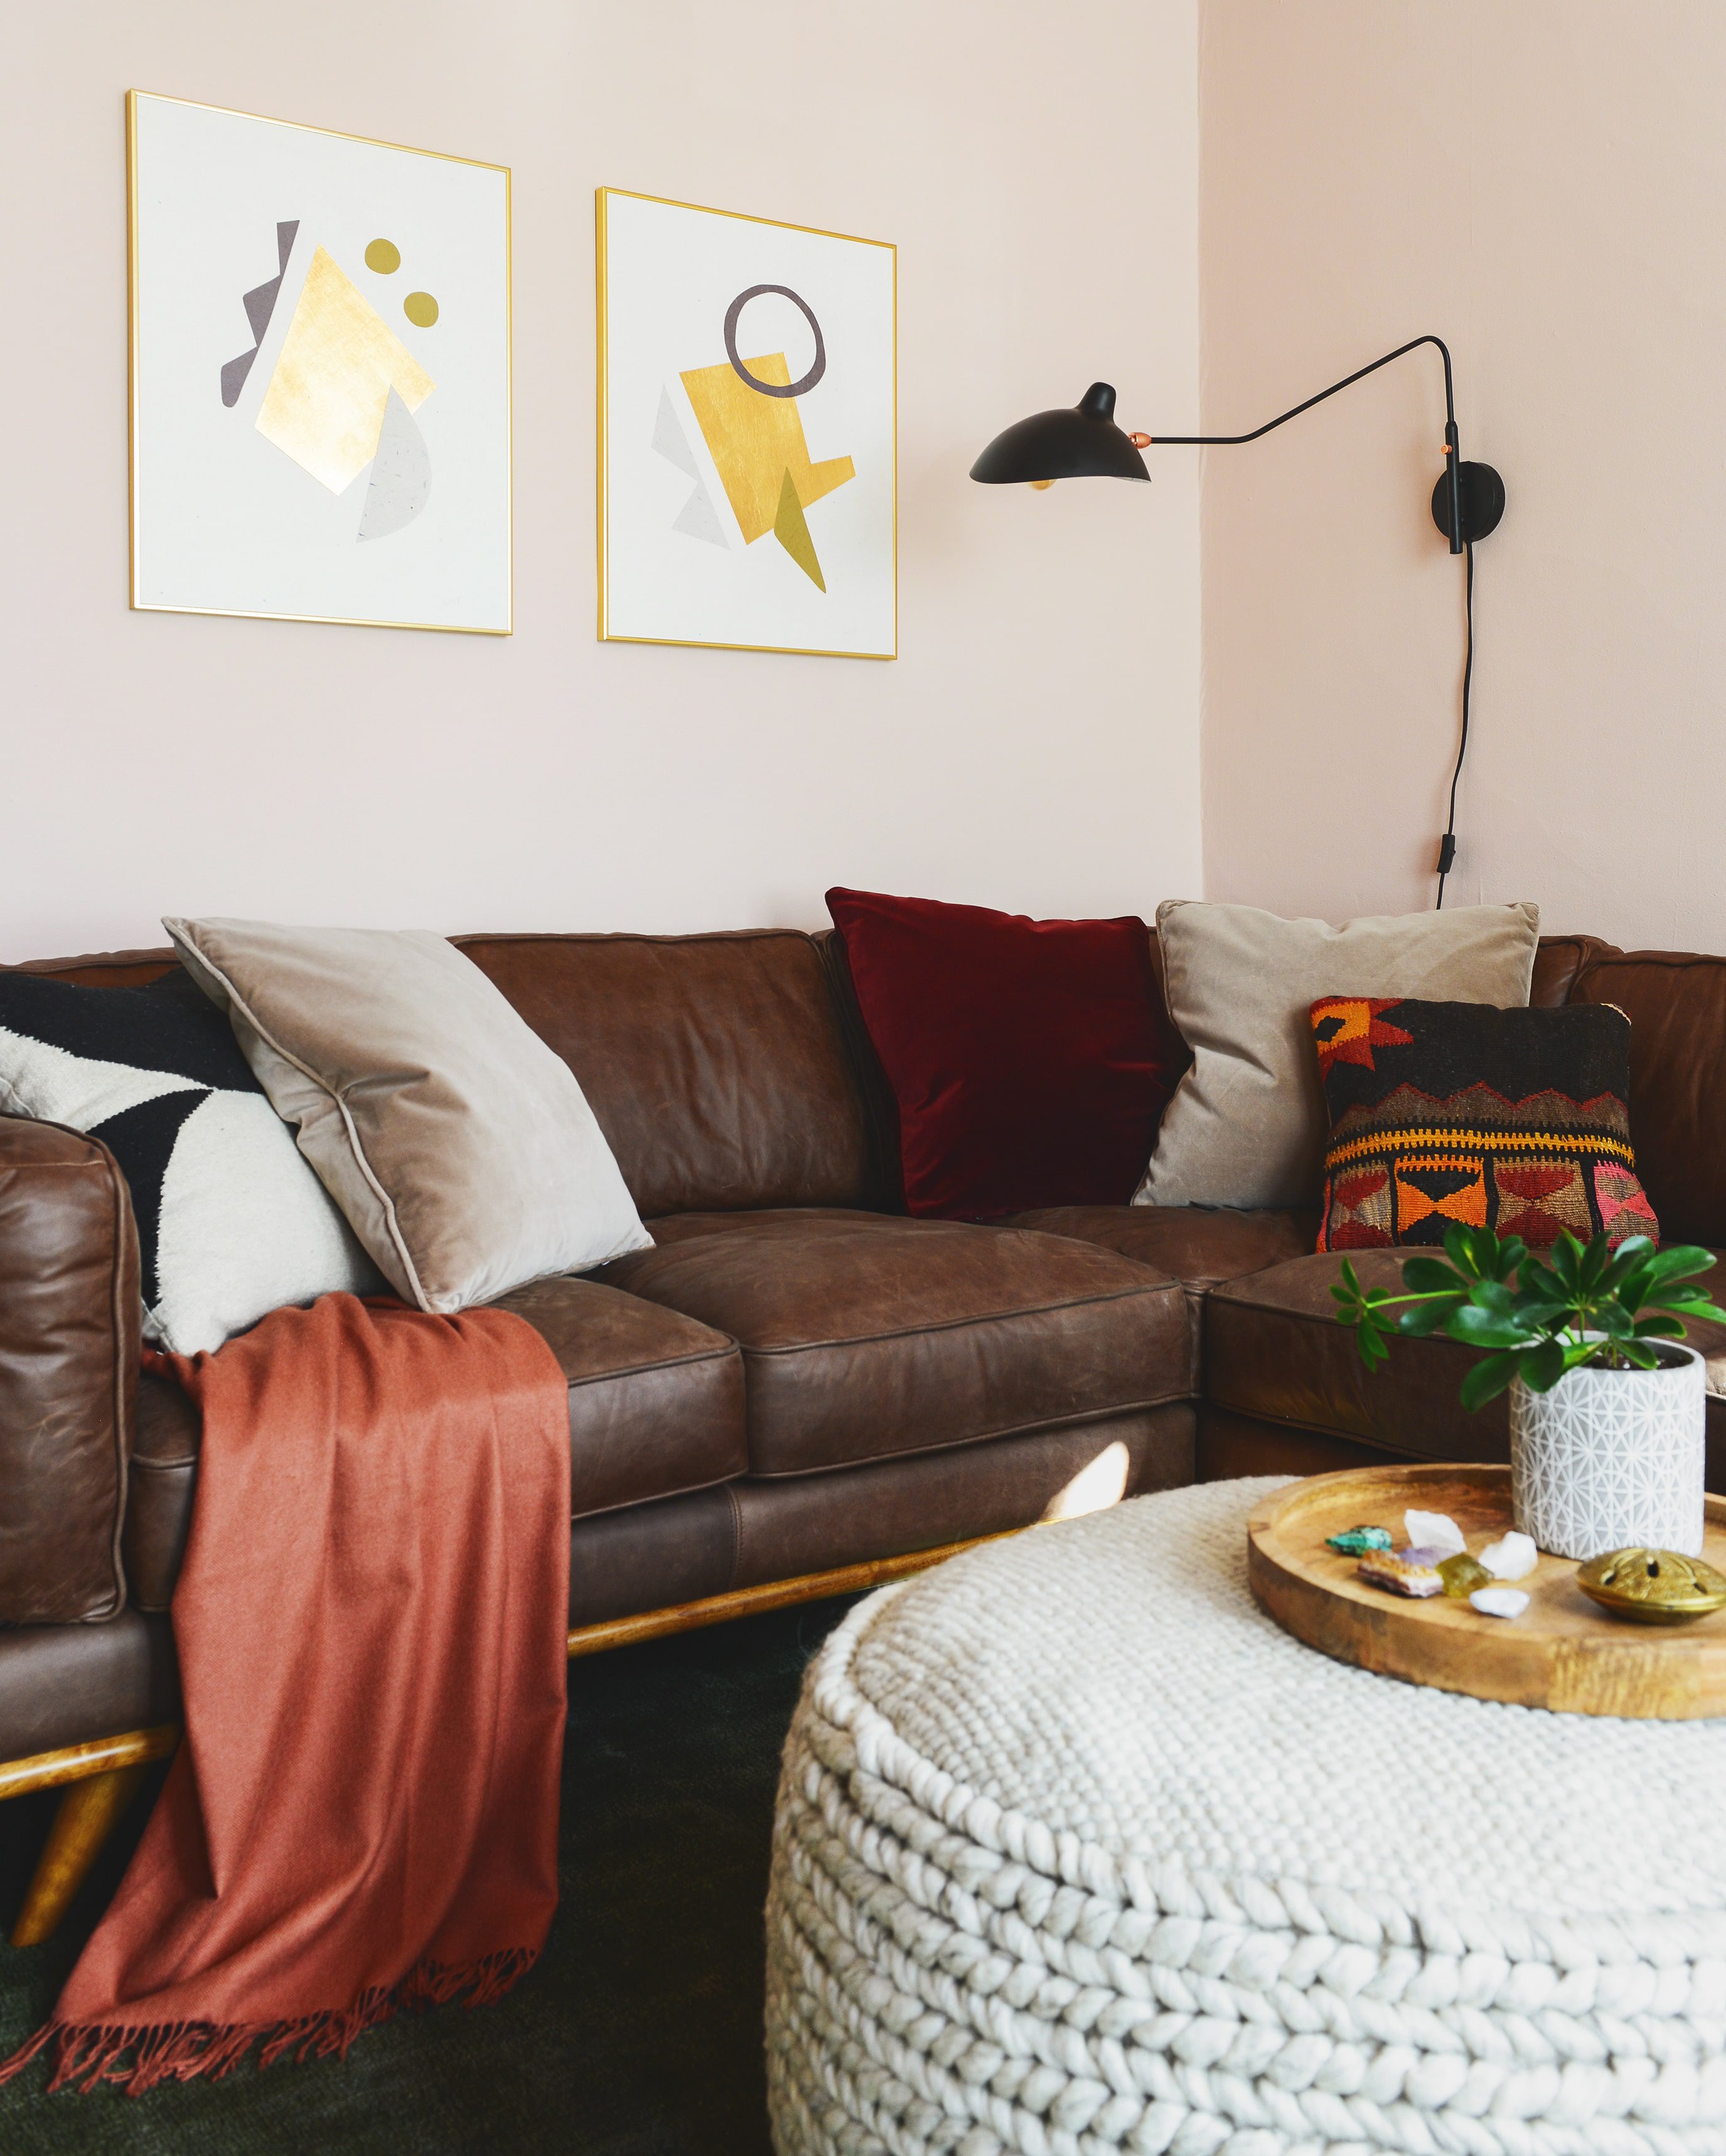 A rental living room gets a makeover with Article furniture | Love where you live now! | via Yellow Brick Home